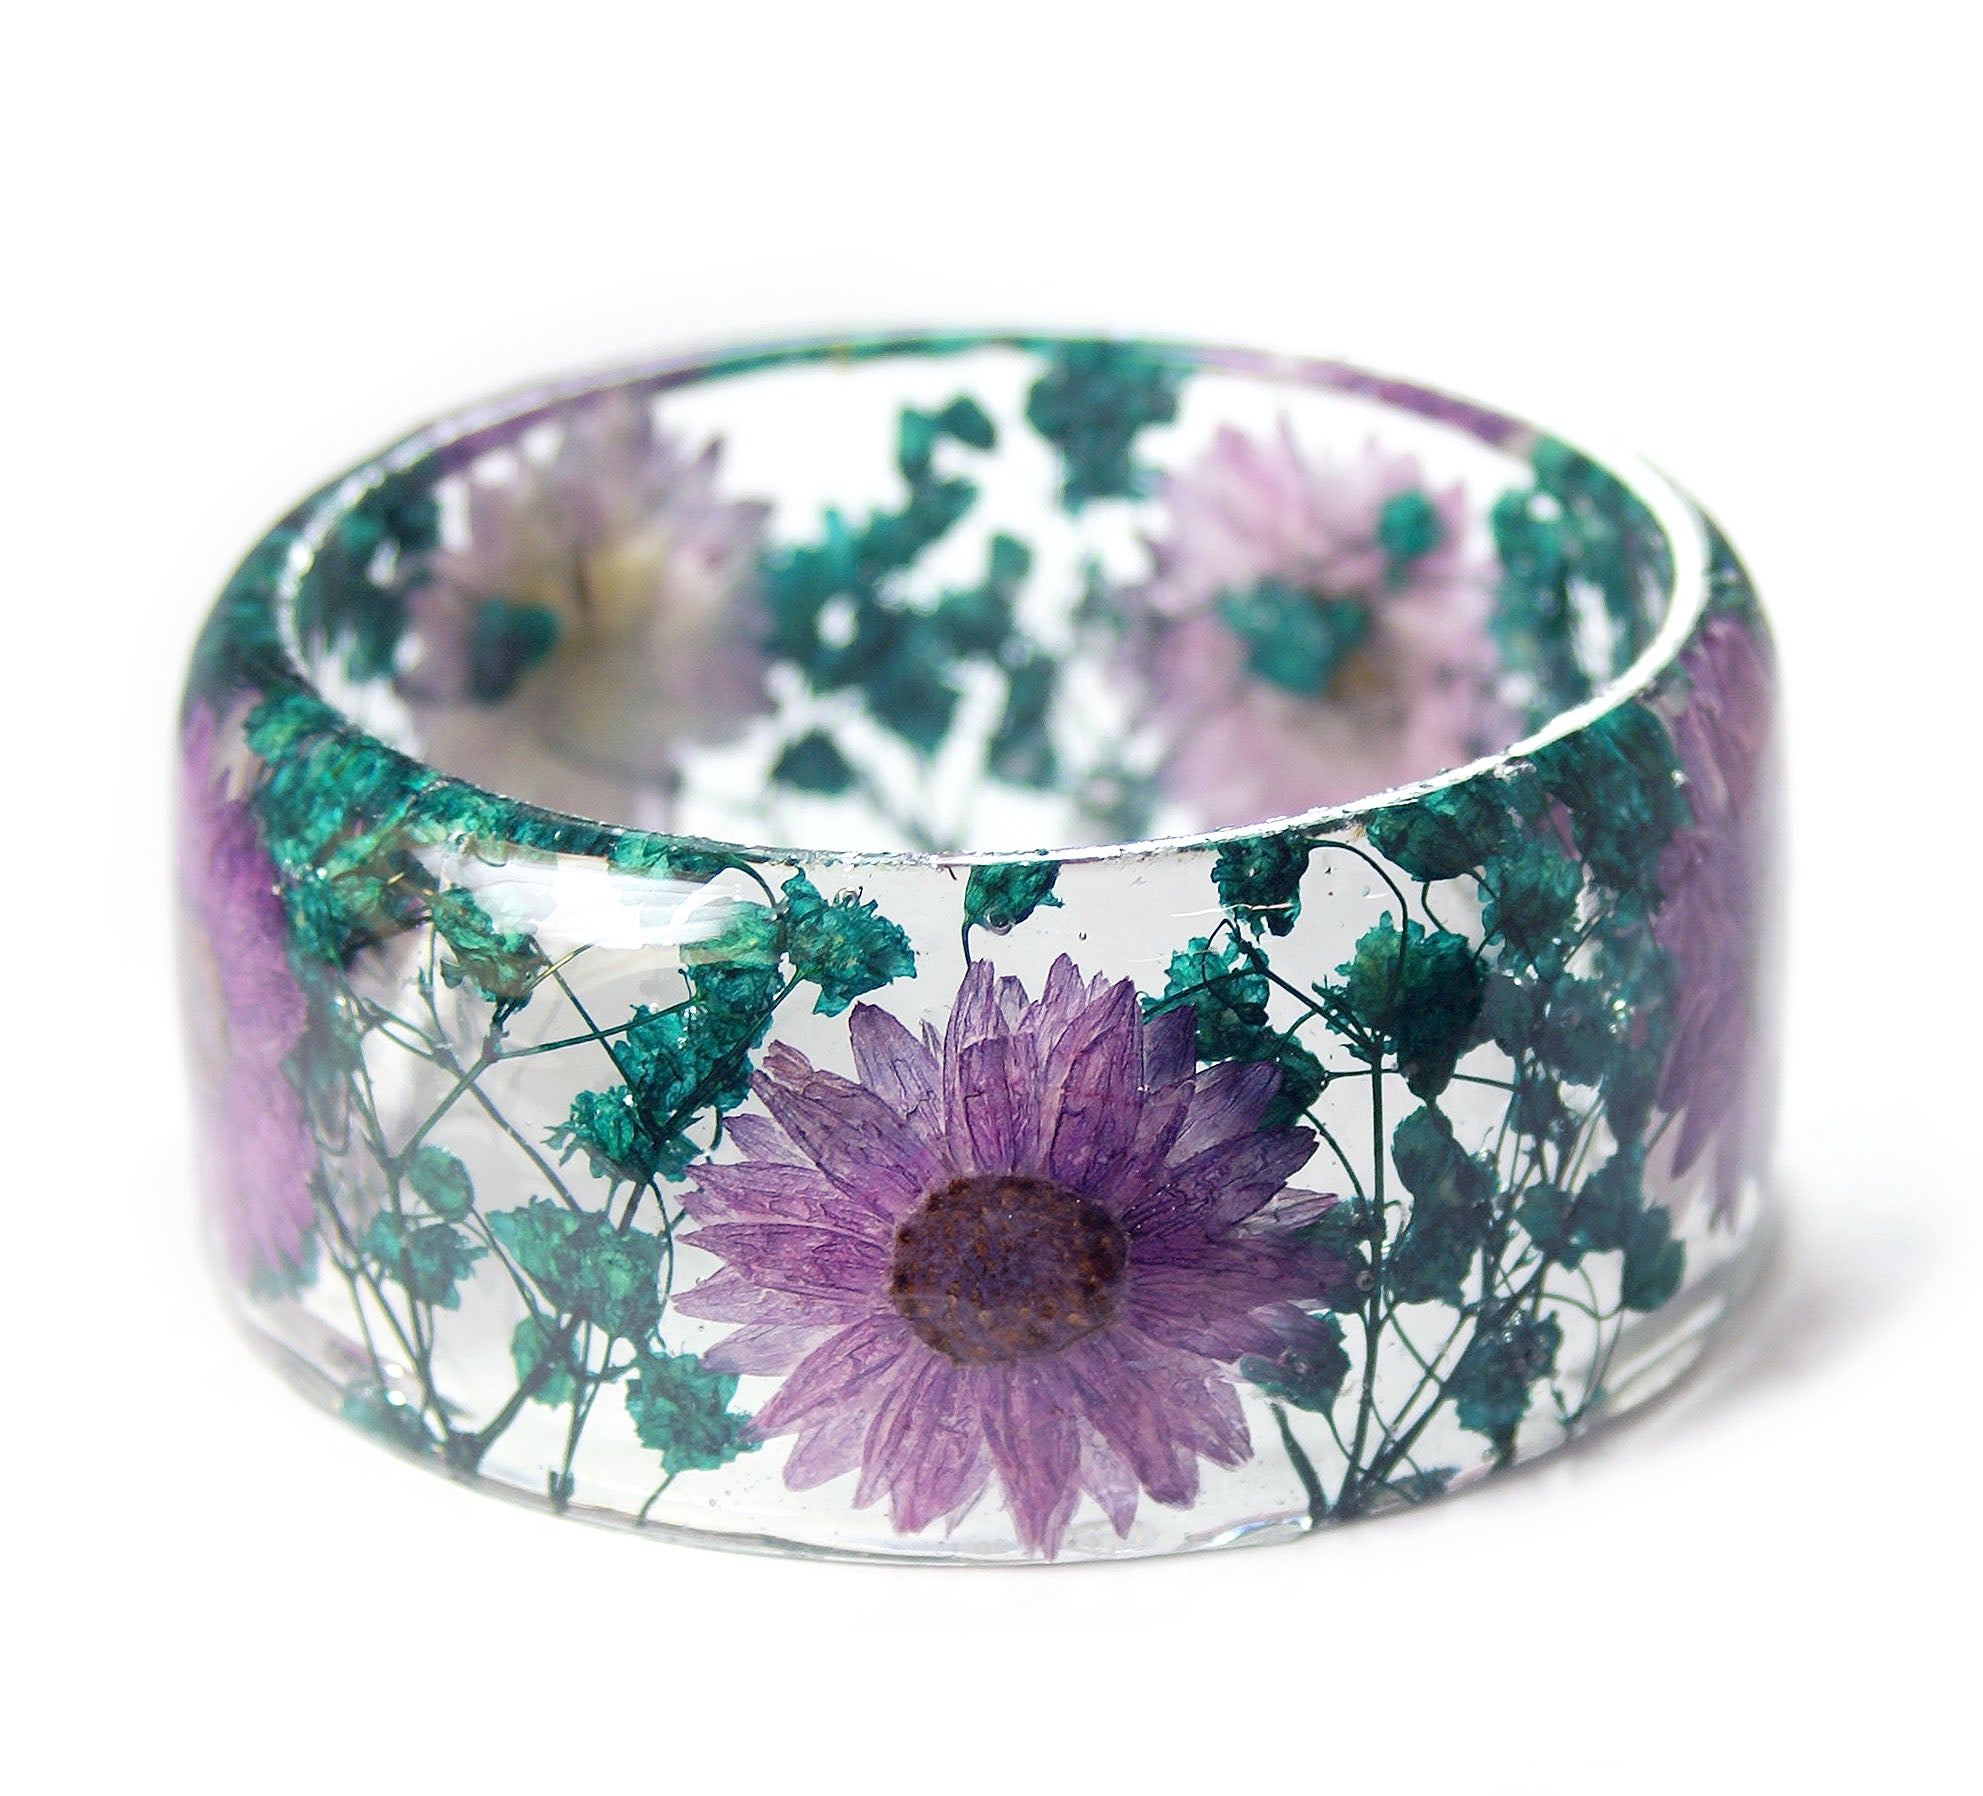 Beautiful resin bracelets with natural element: flowers, pebbles, grasses  etc. Very pretty. | Resin jewelry, Flower resin jewelry, Resin crafts